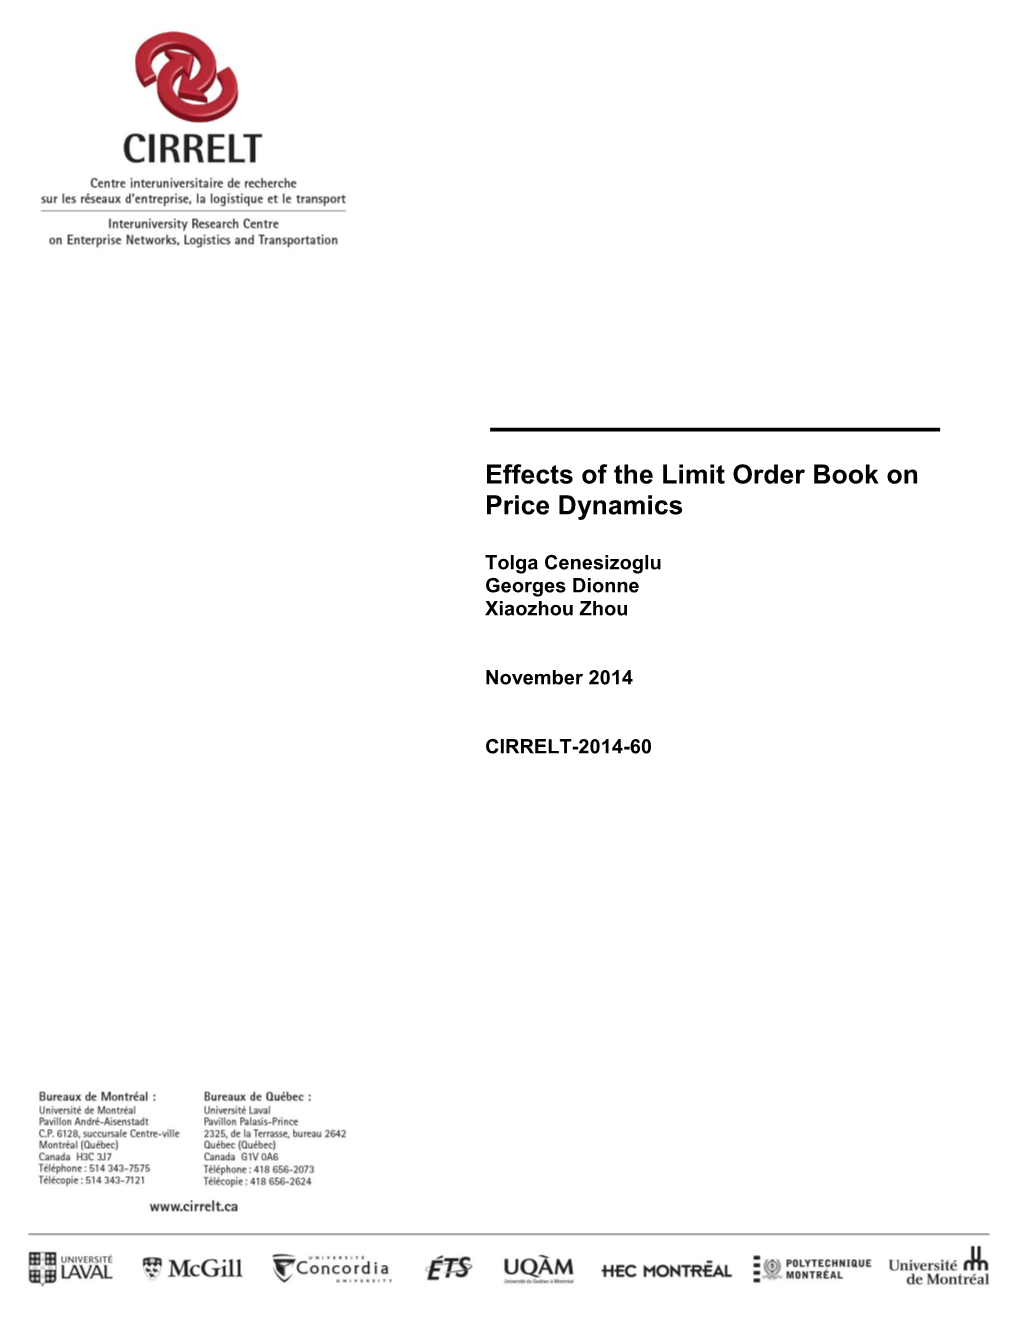 Effects of the Limit Order Book on Price Dynamics